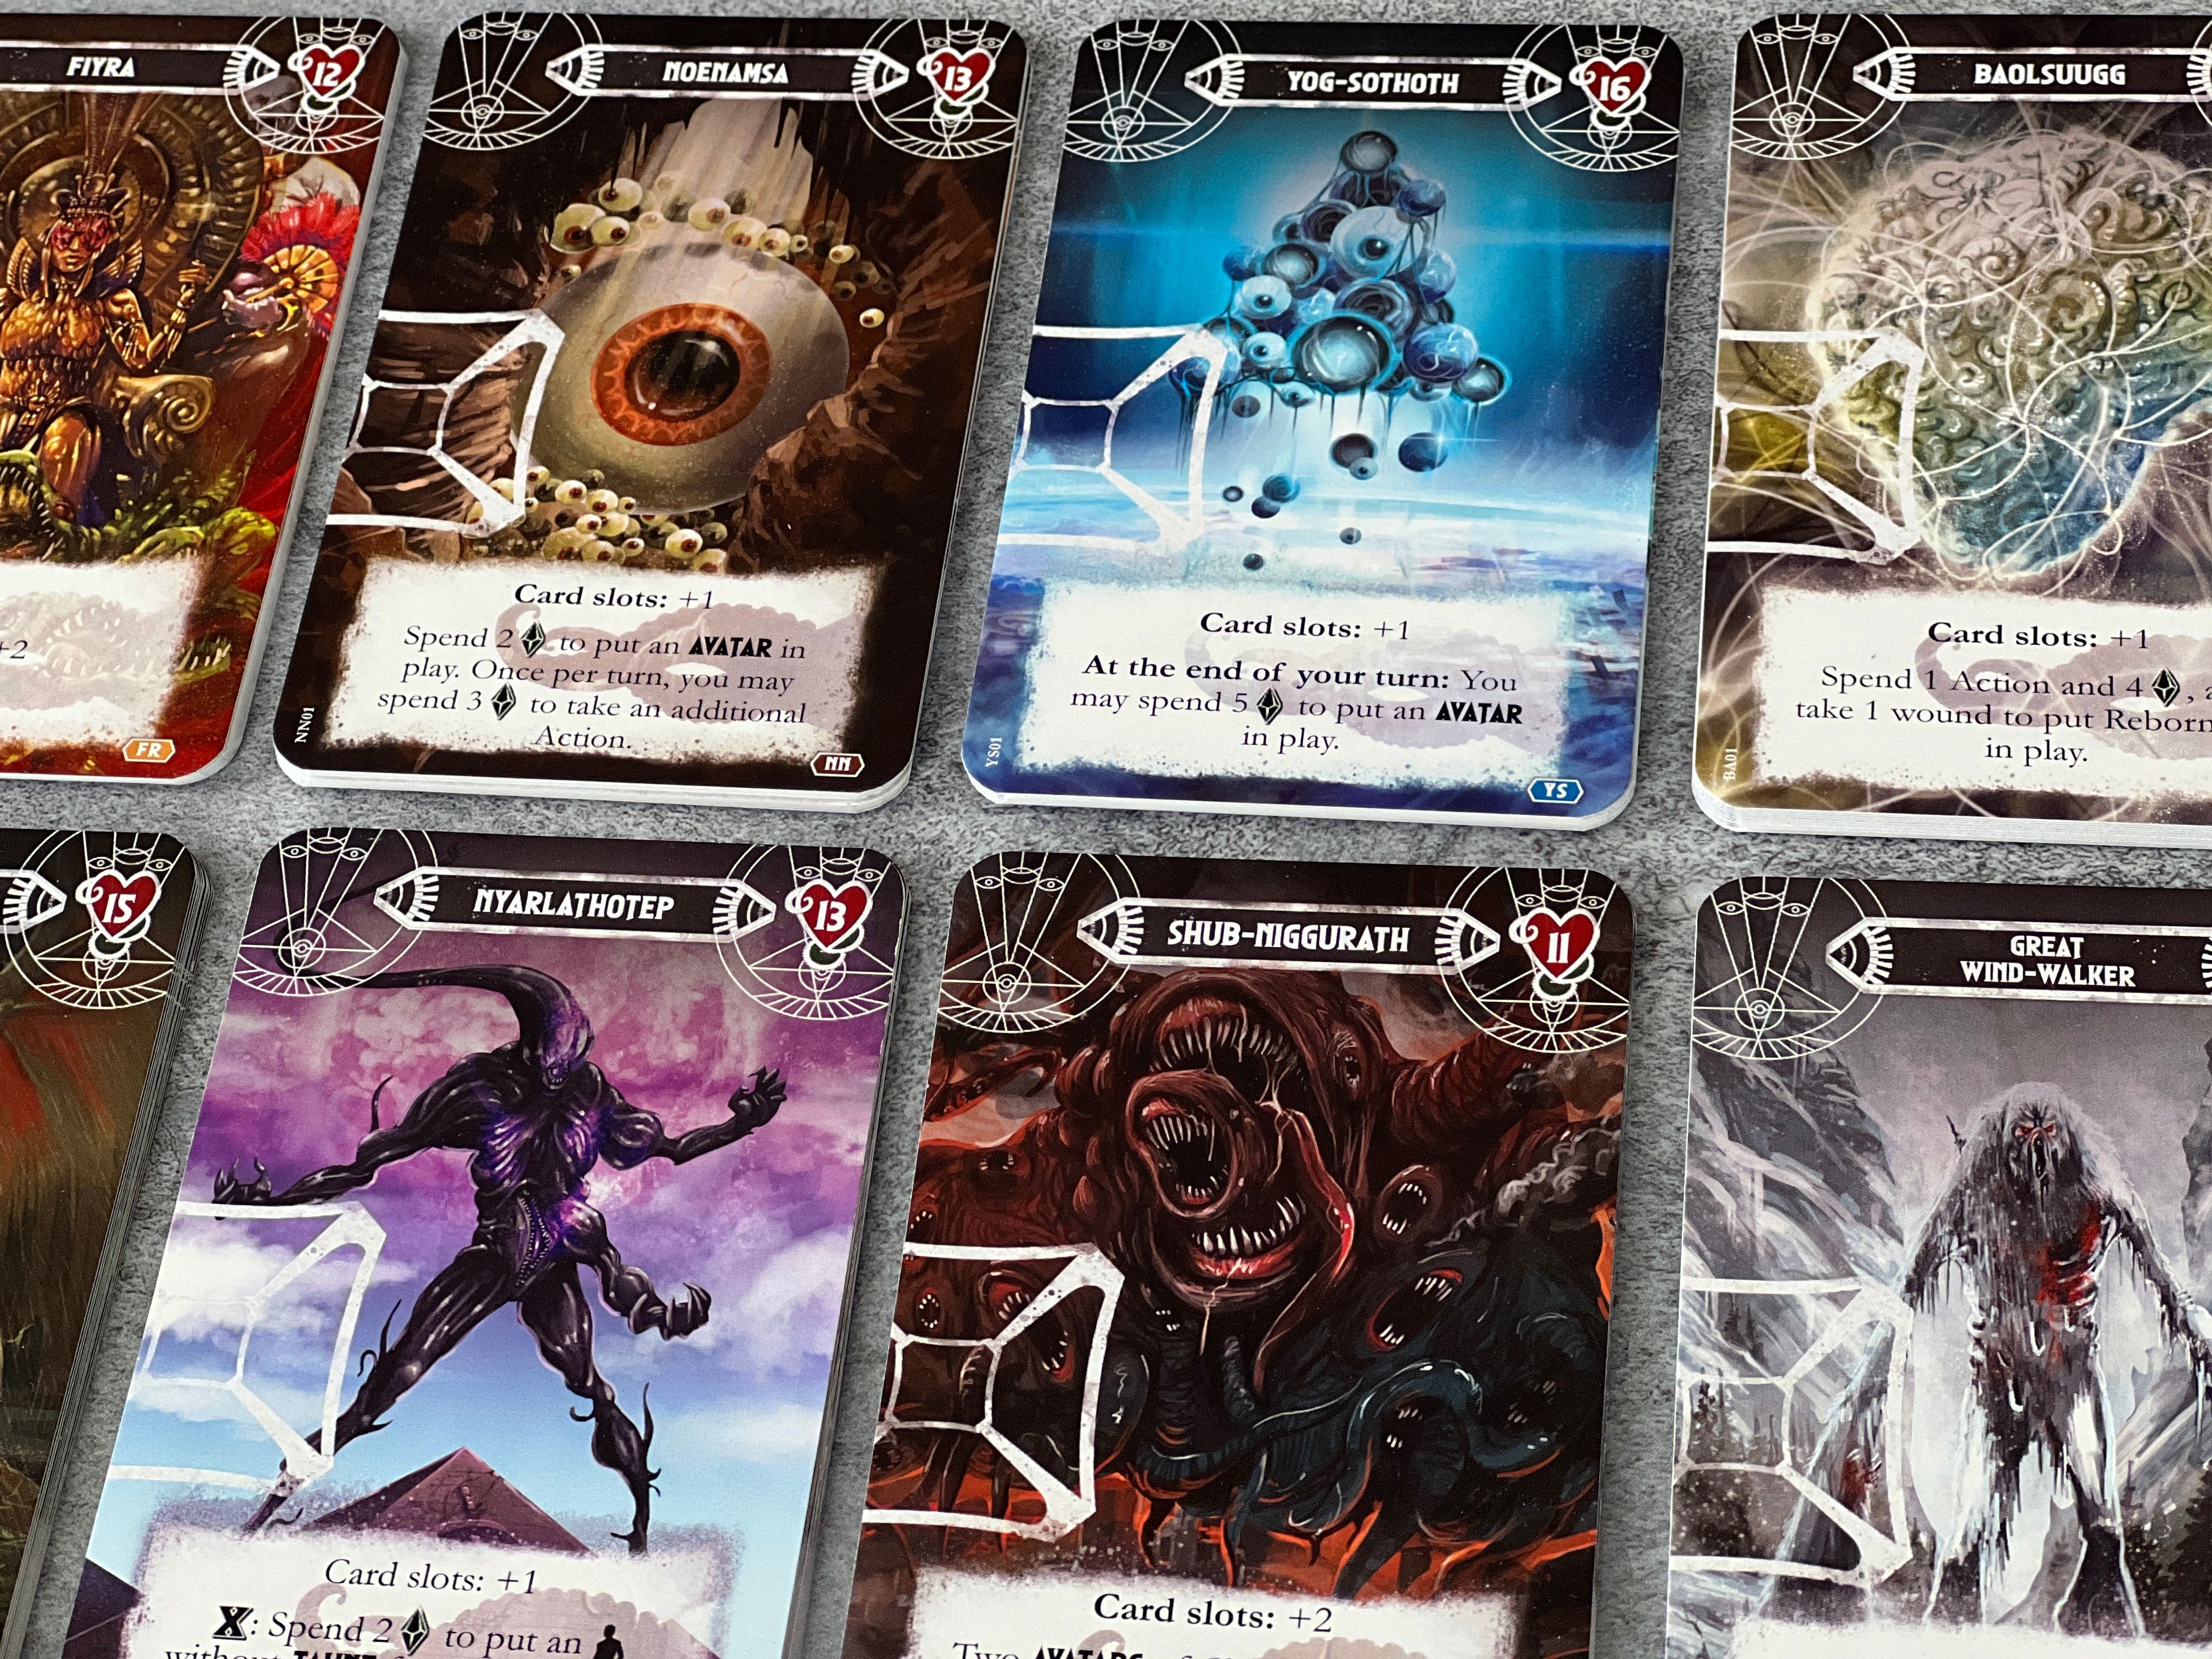 PowerCore Call of Cthulhu cards